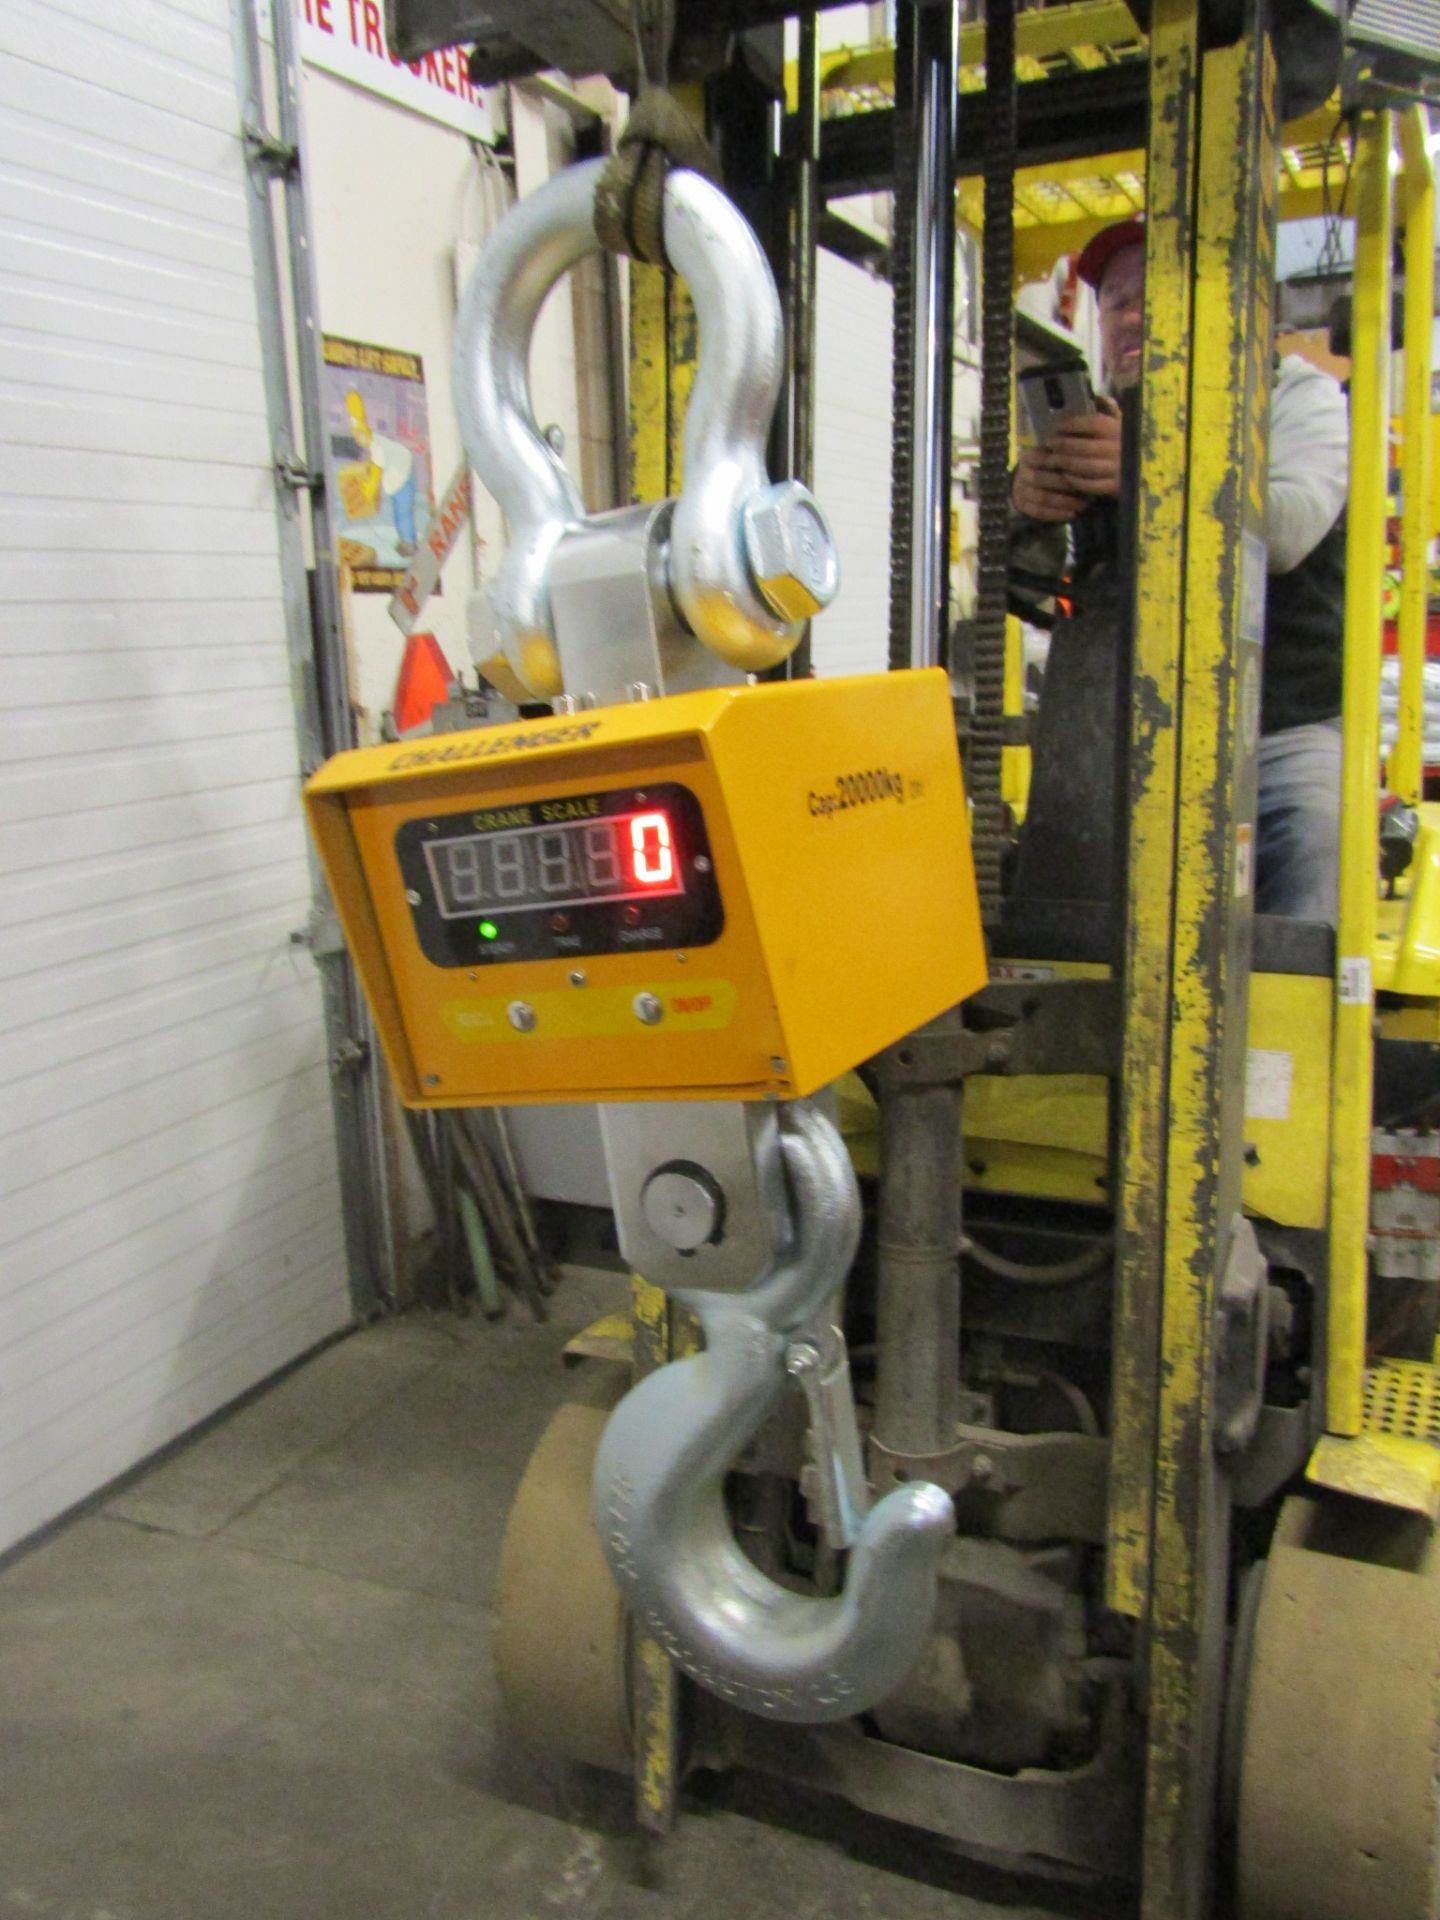 Hanging MINT Digital Crane Scale 40,000lbs 20 ton Capacity - complete with remote control and